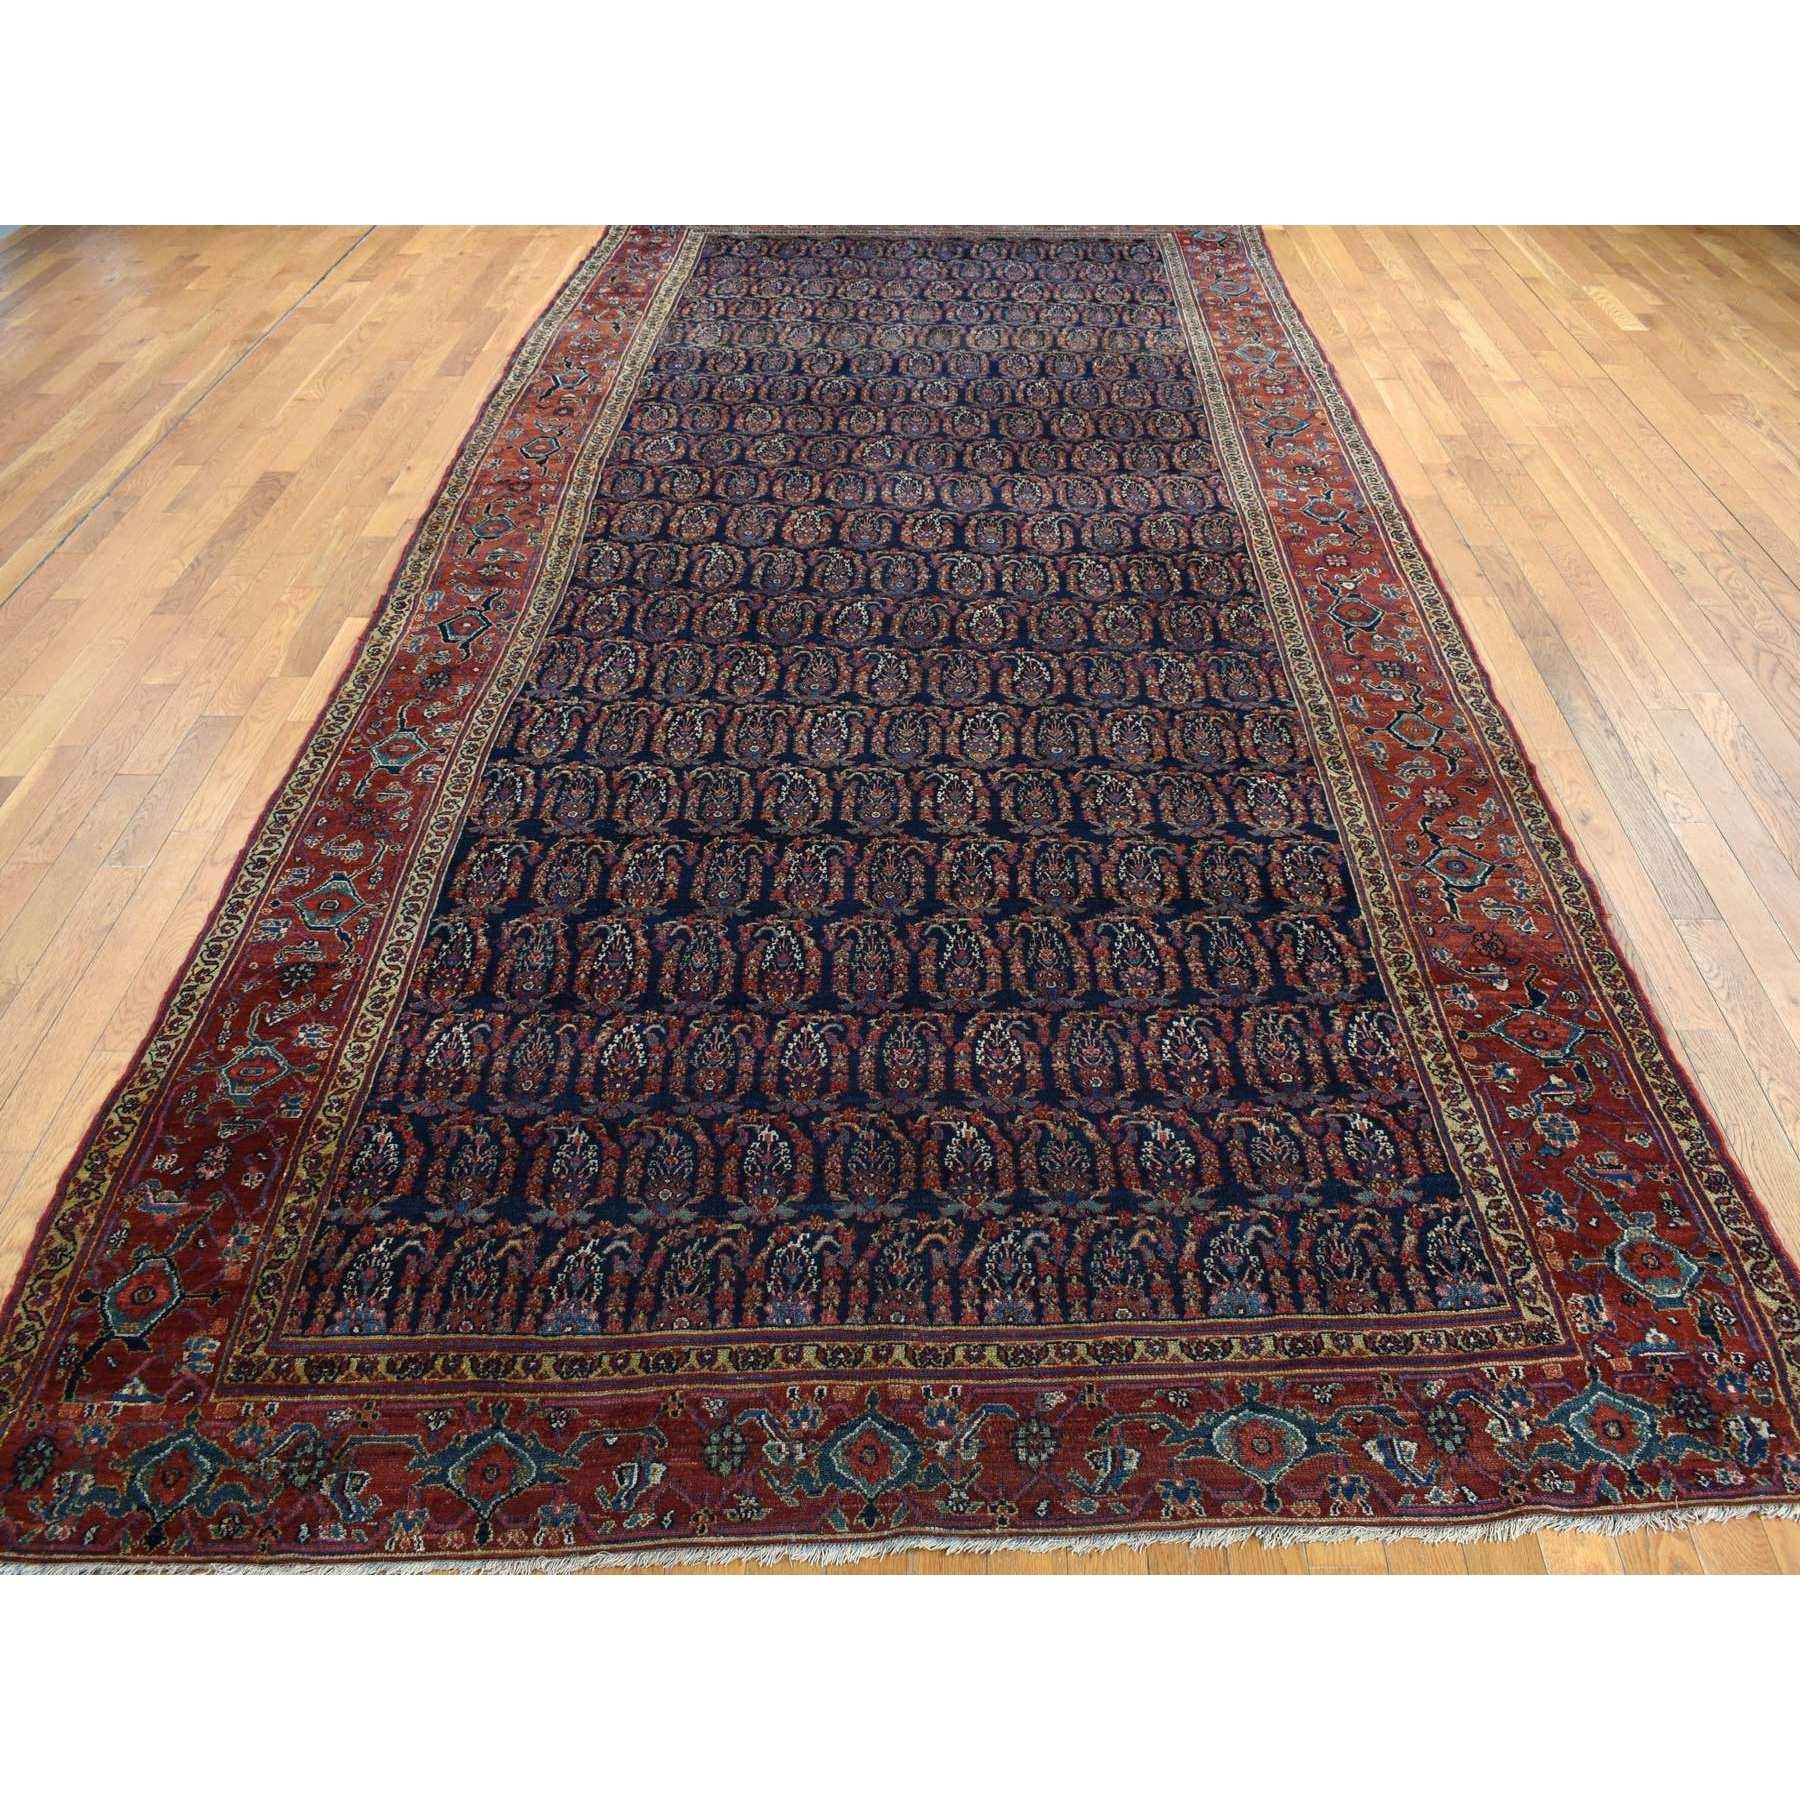 This fabulous Hand-Knotted carpet has been created and designed for extra strength and durability. This rug has been handcrafted for weeks in the traditional method that is used to make
Exact Rug Size in Feet and Inches : 7'1